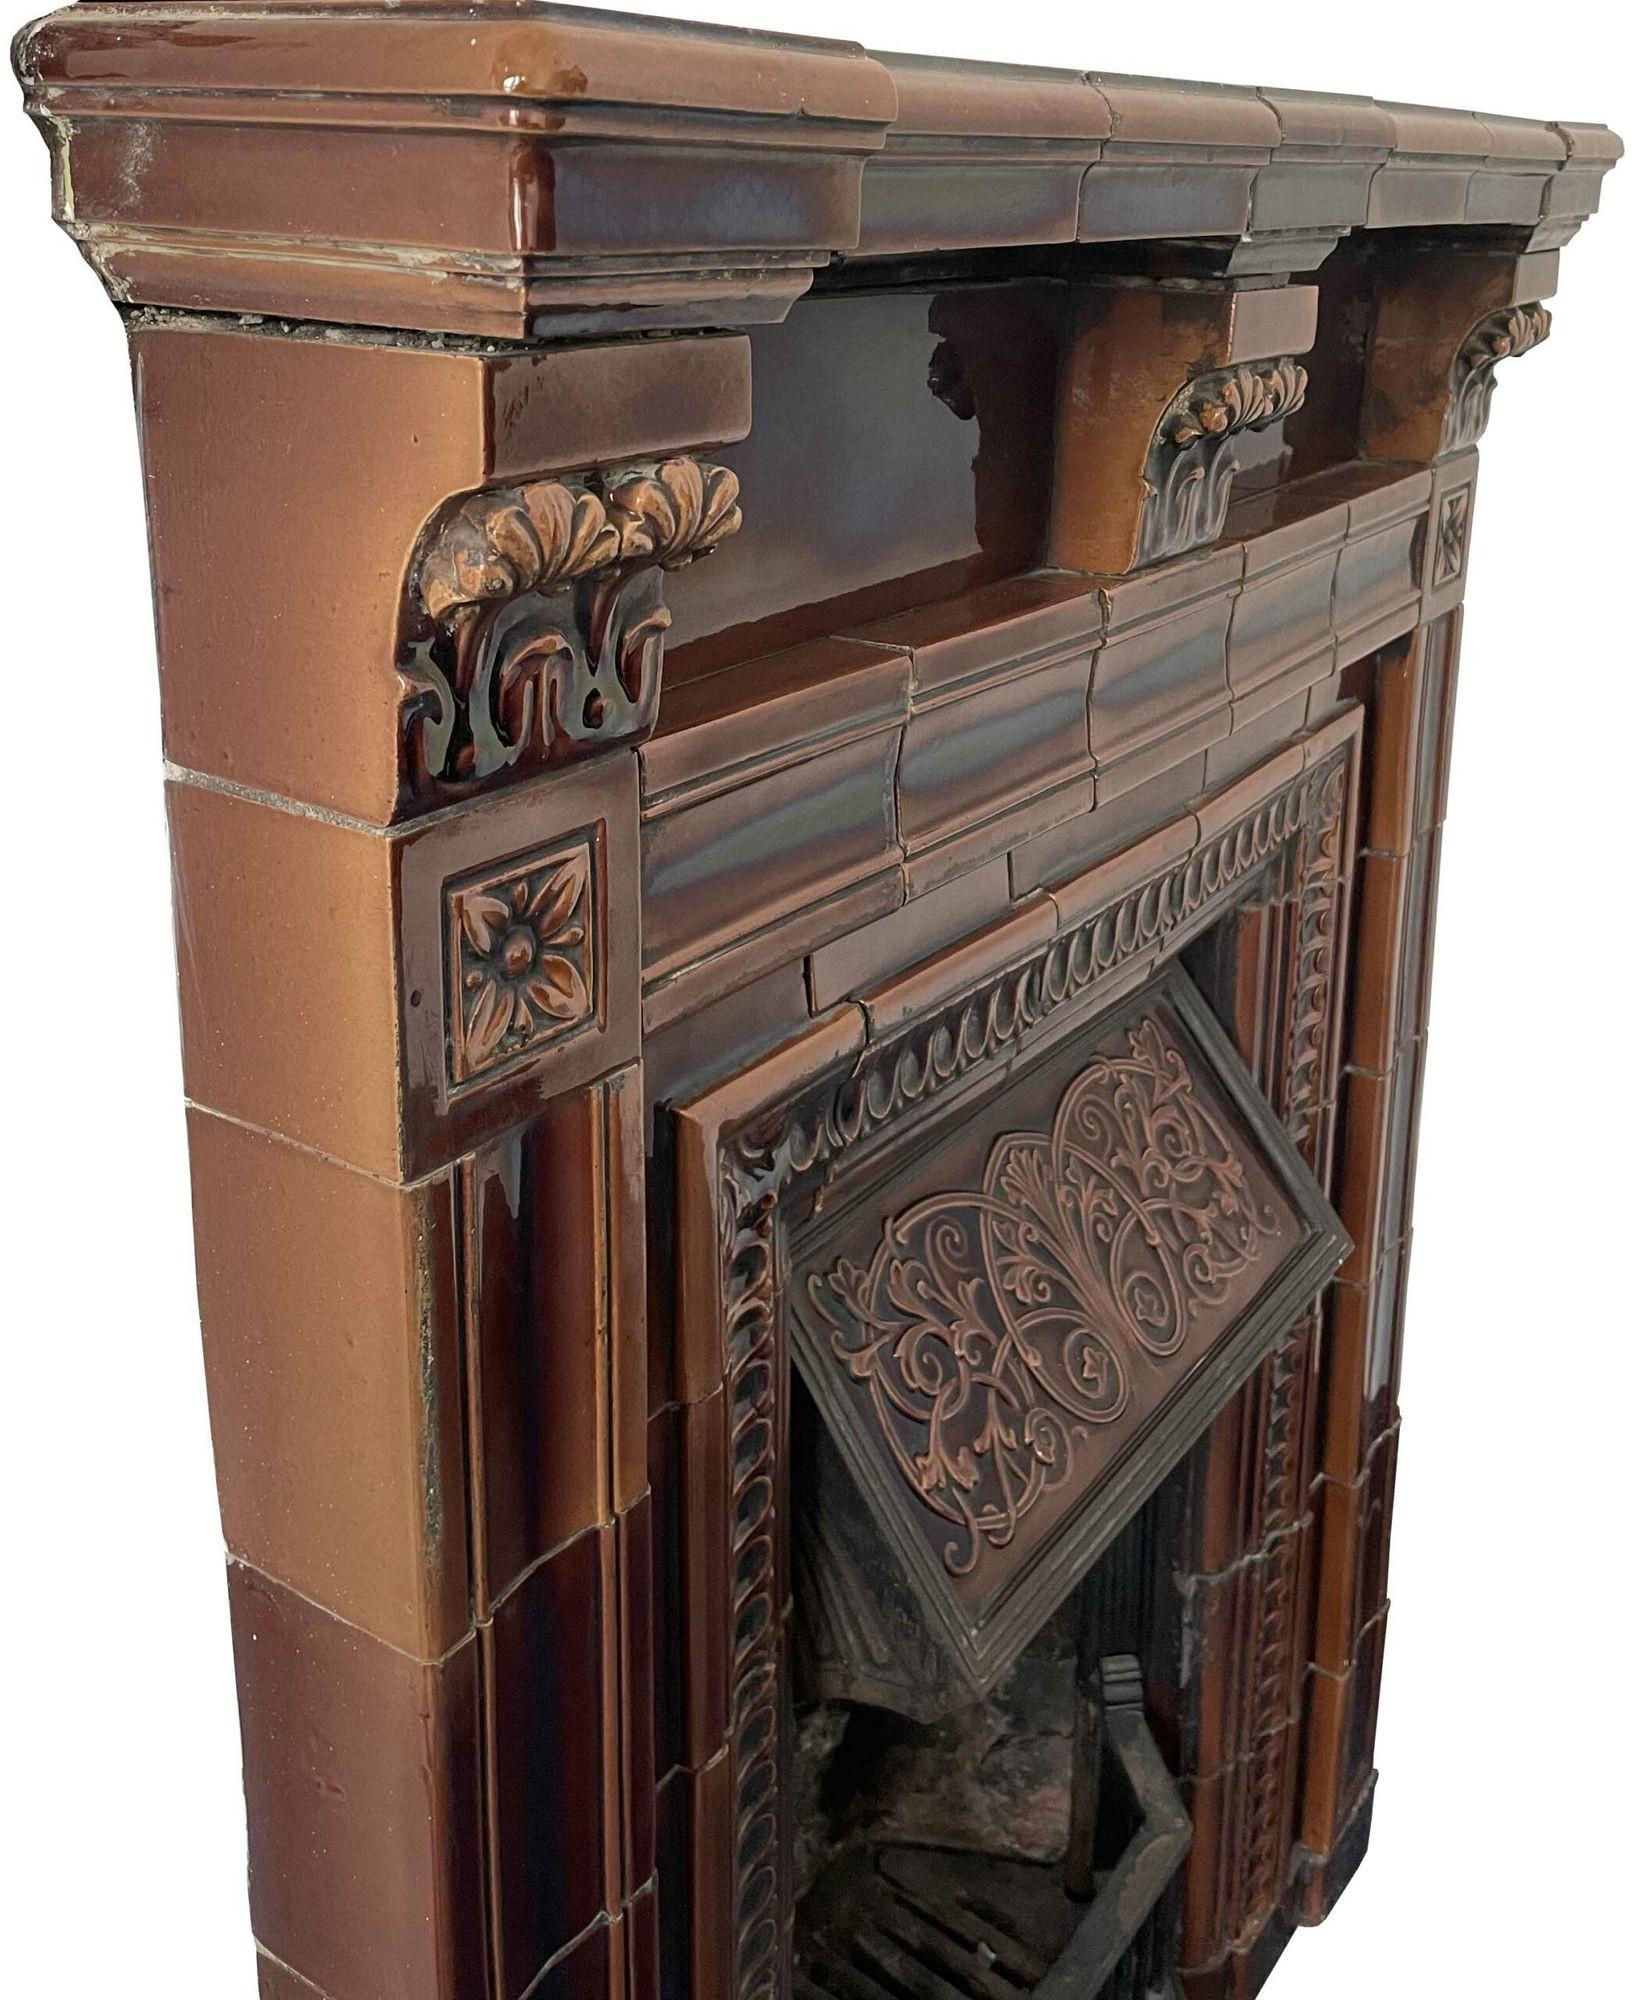 This is one of three similar fire mantels recently salvaged from a property in the East of England. It is most likely made by Doulton. It features a two-tone brown glaze.
 
Additional Dimensions 
Opening Height 83.5 cm
Opening Width 46